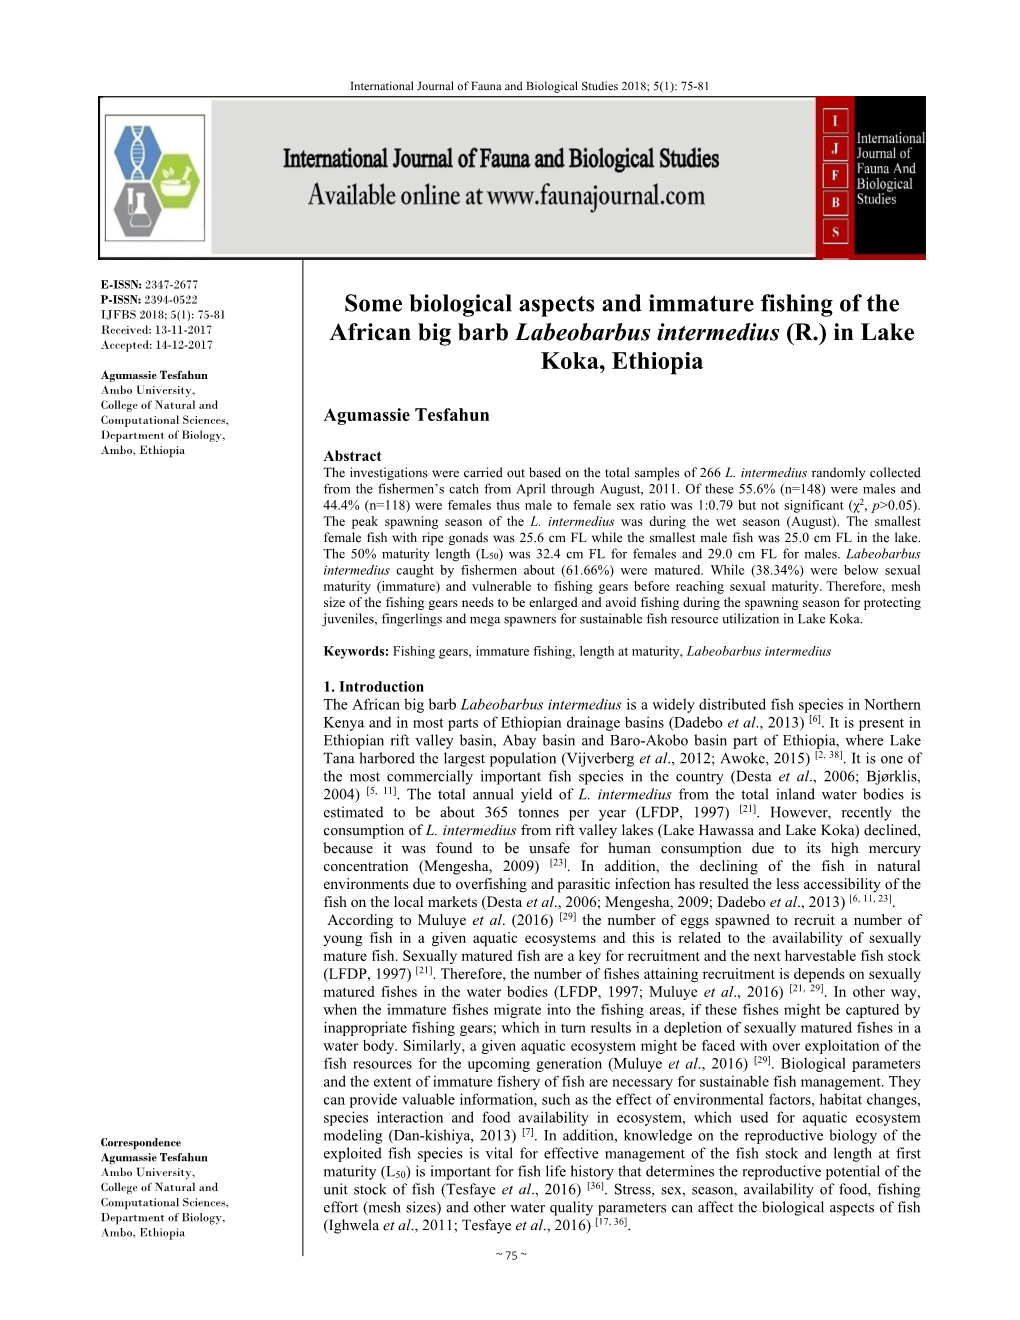 Some Biological Aspects and Immature Fishing of the African Big